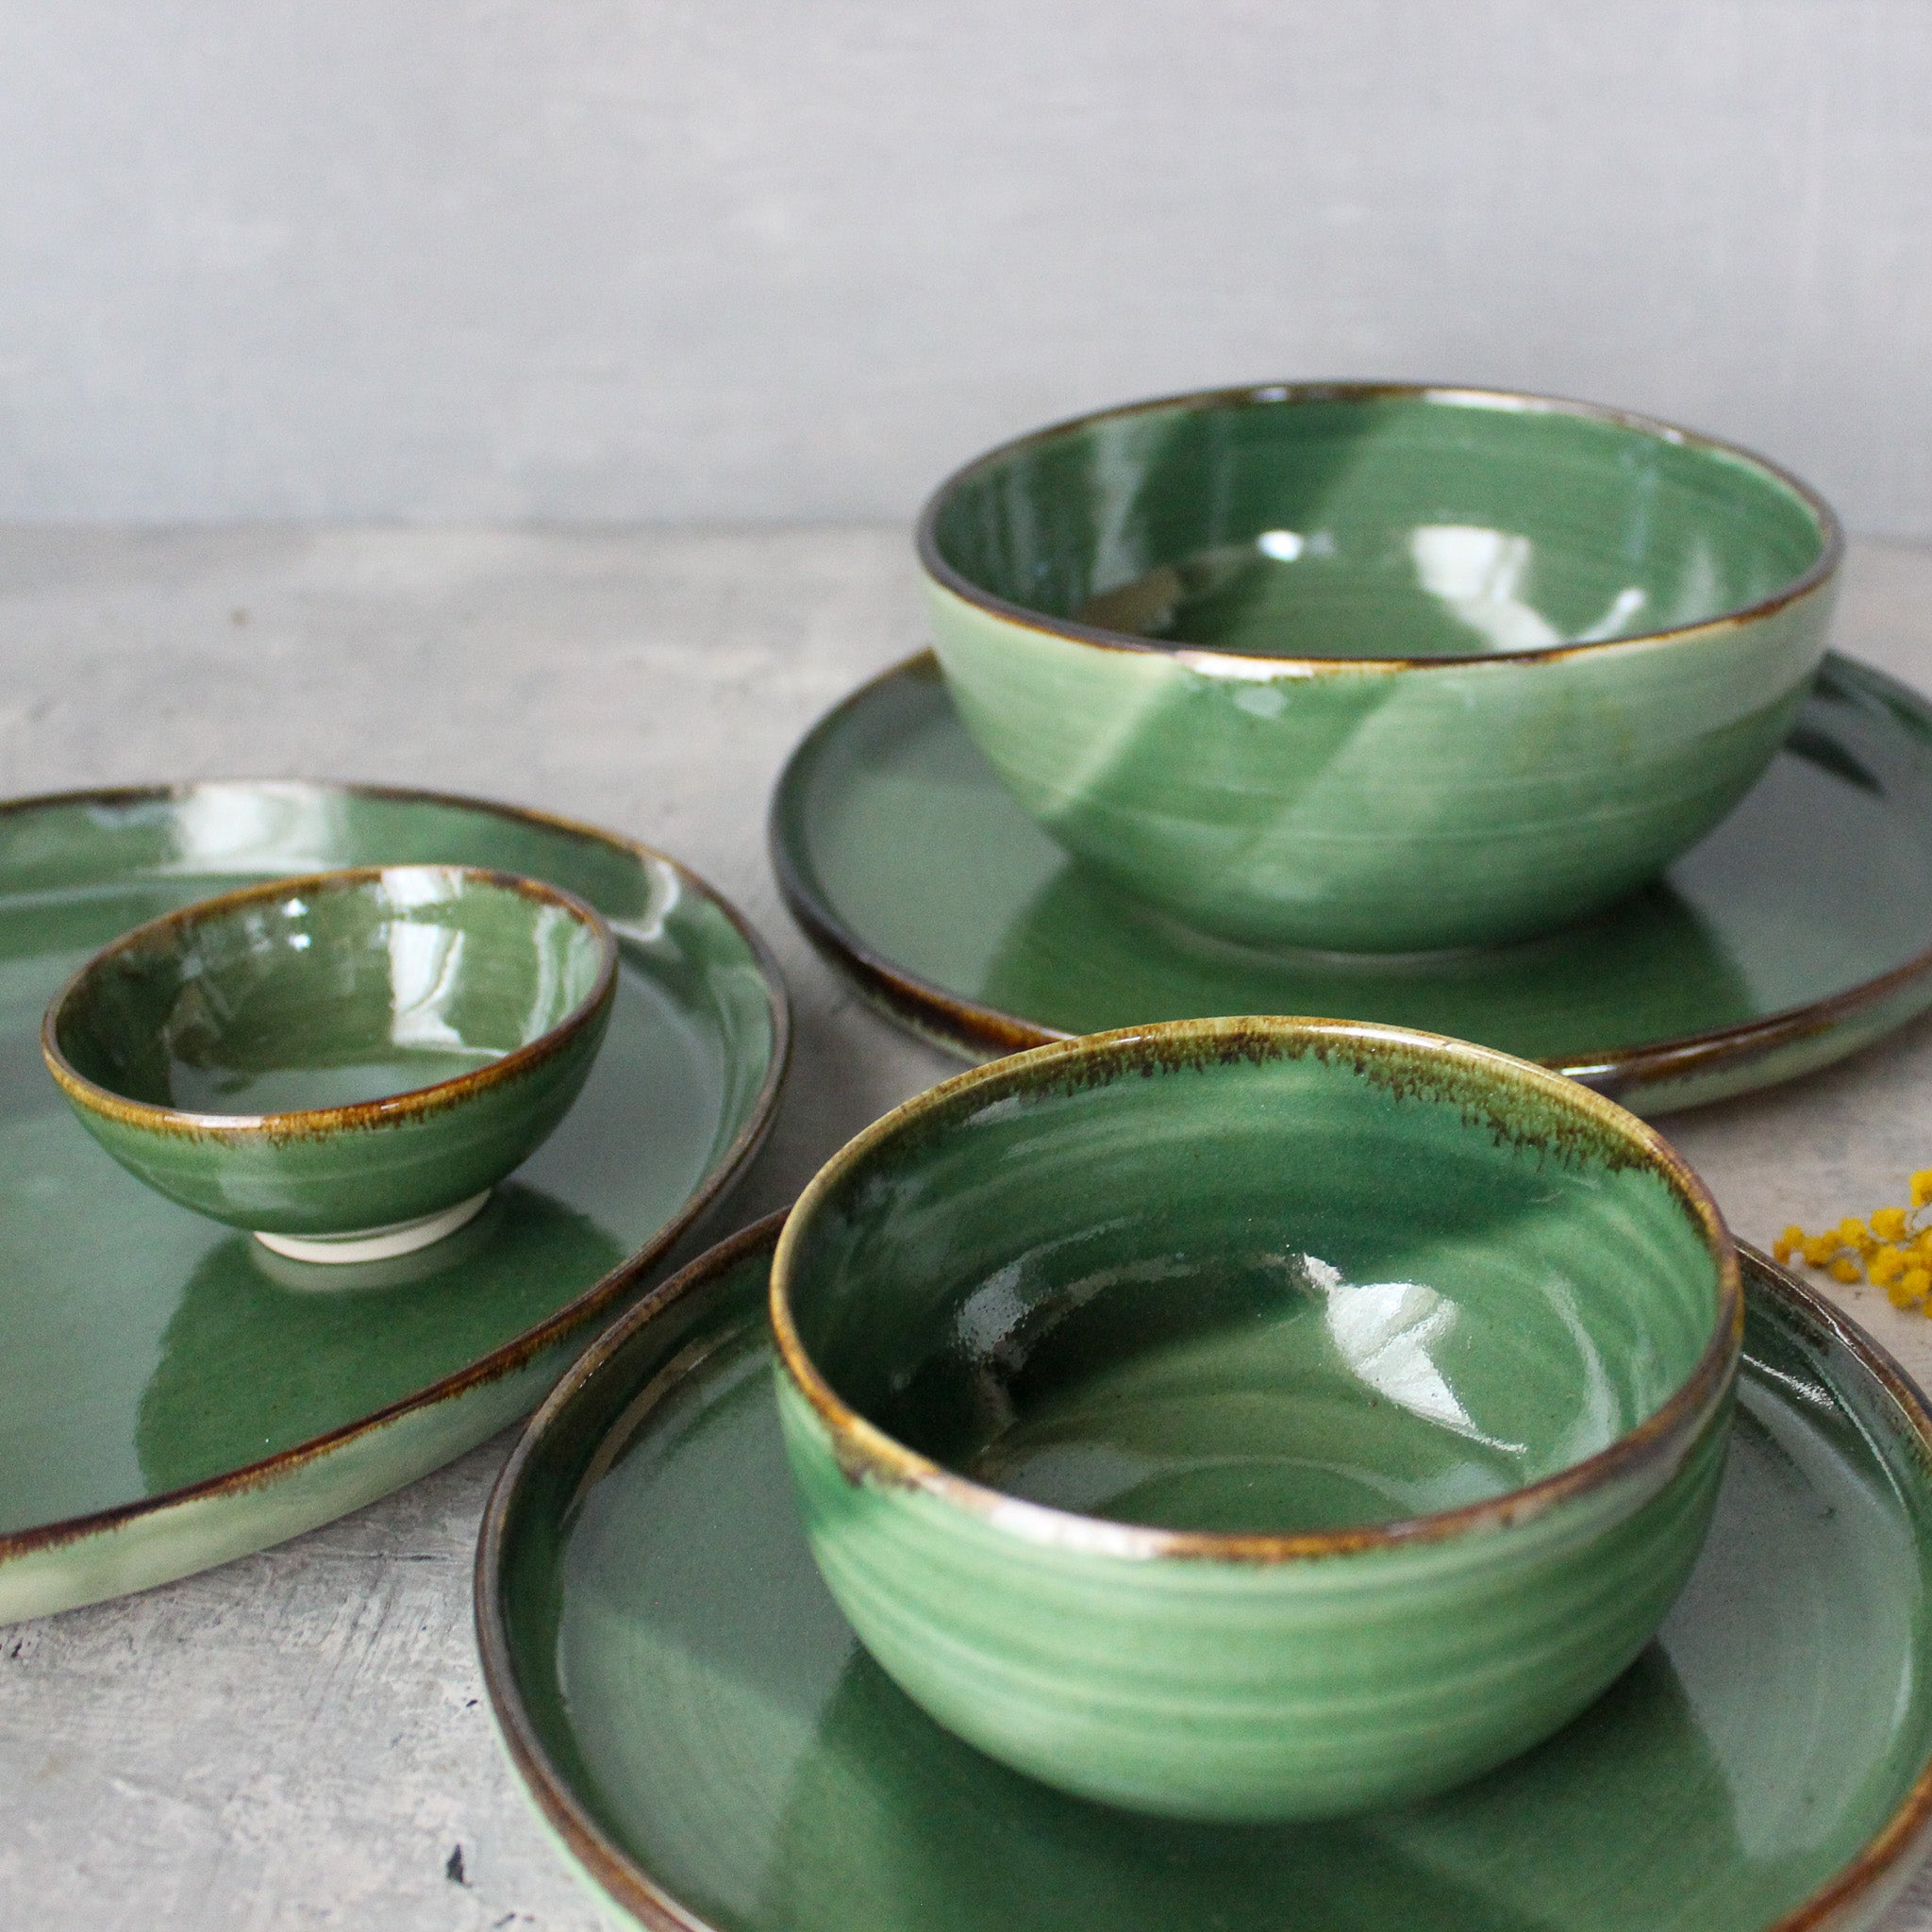 Green Ceramic Bowls - Tribe Castlemaine